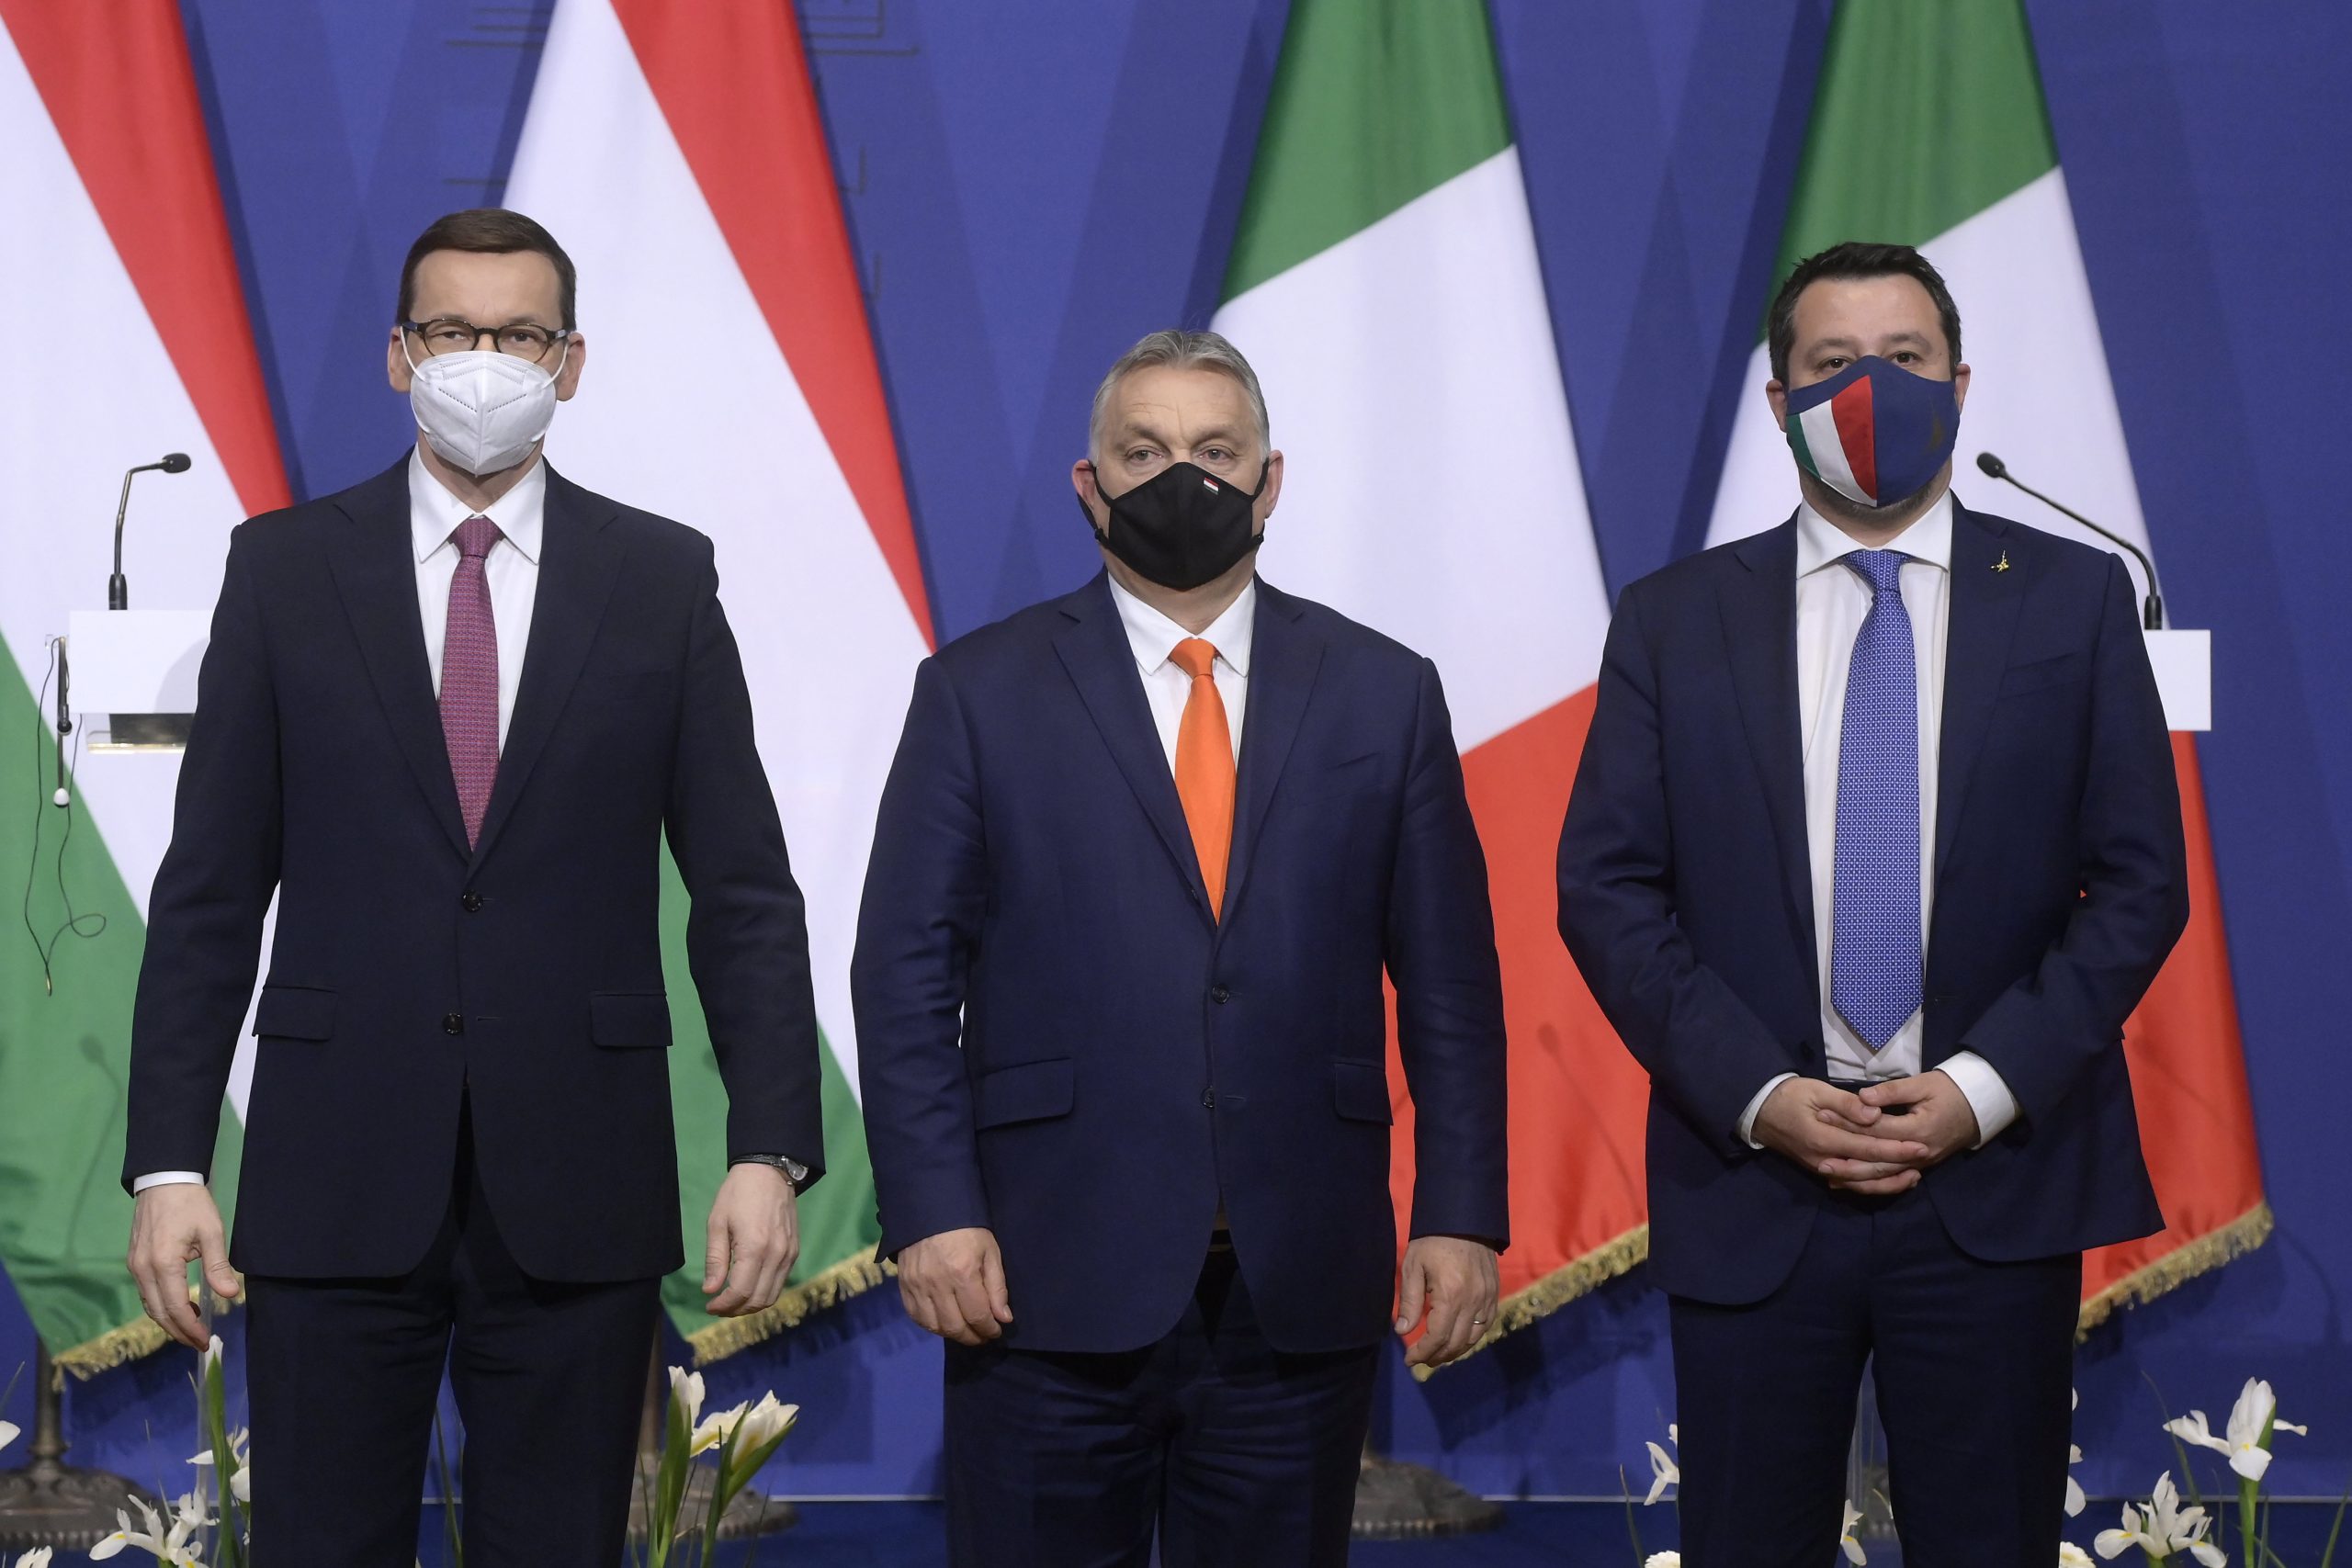 Press Roundup: Orbán, Salvini and Morawiecki Plan a New Right-Wing Alliance